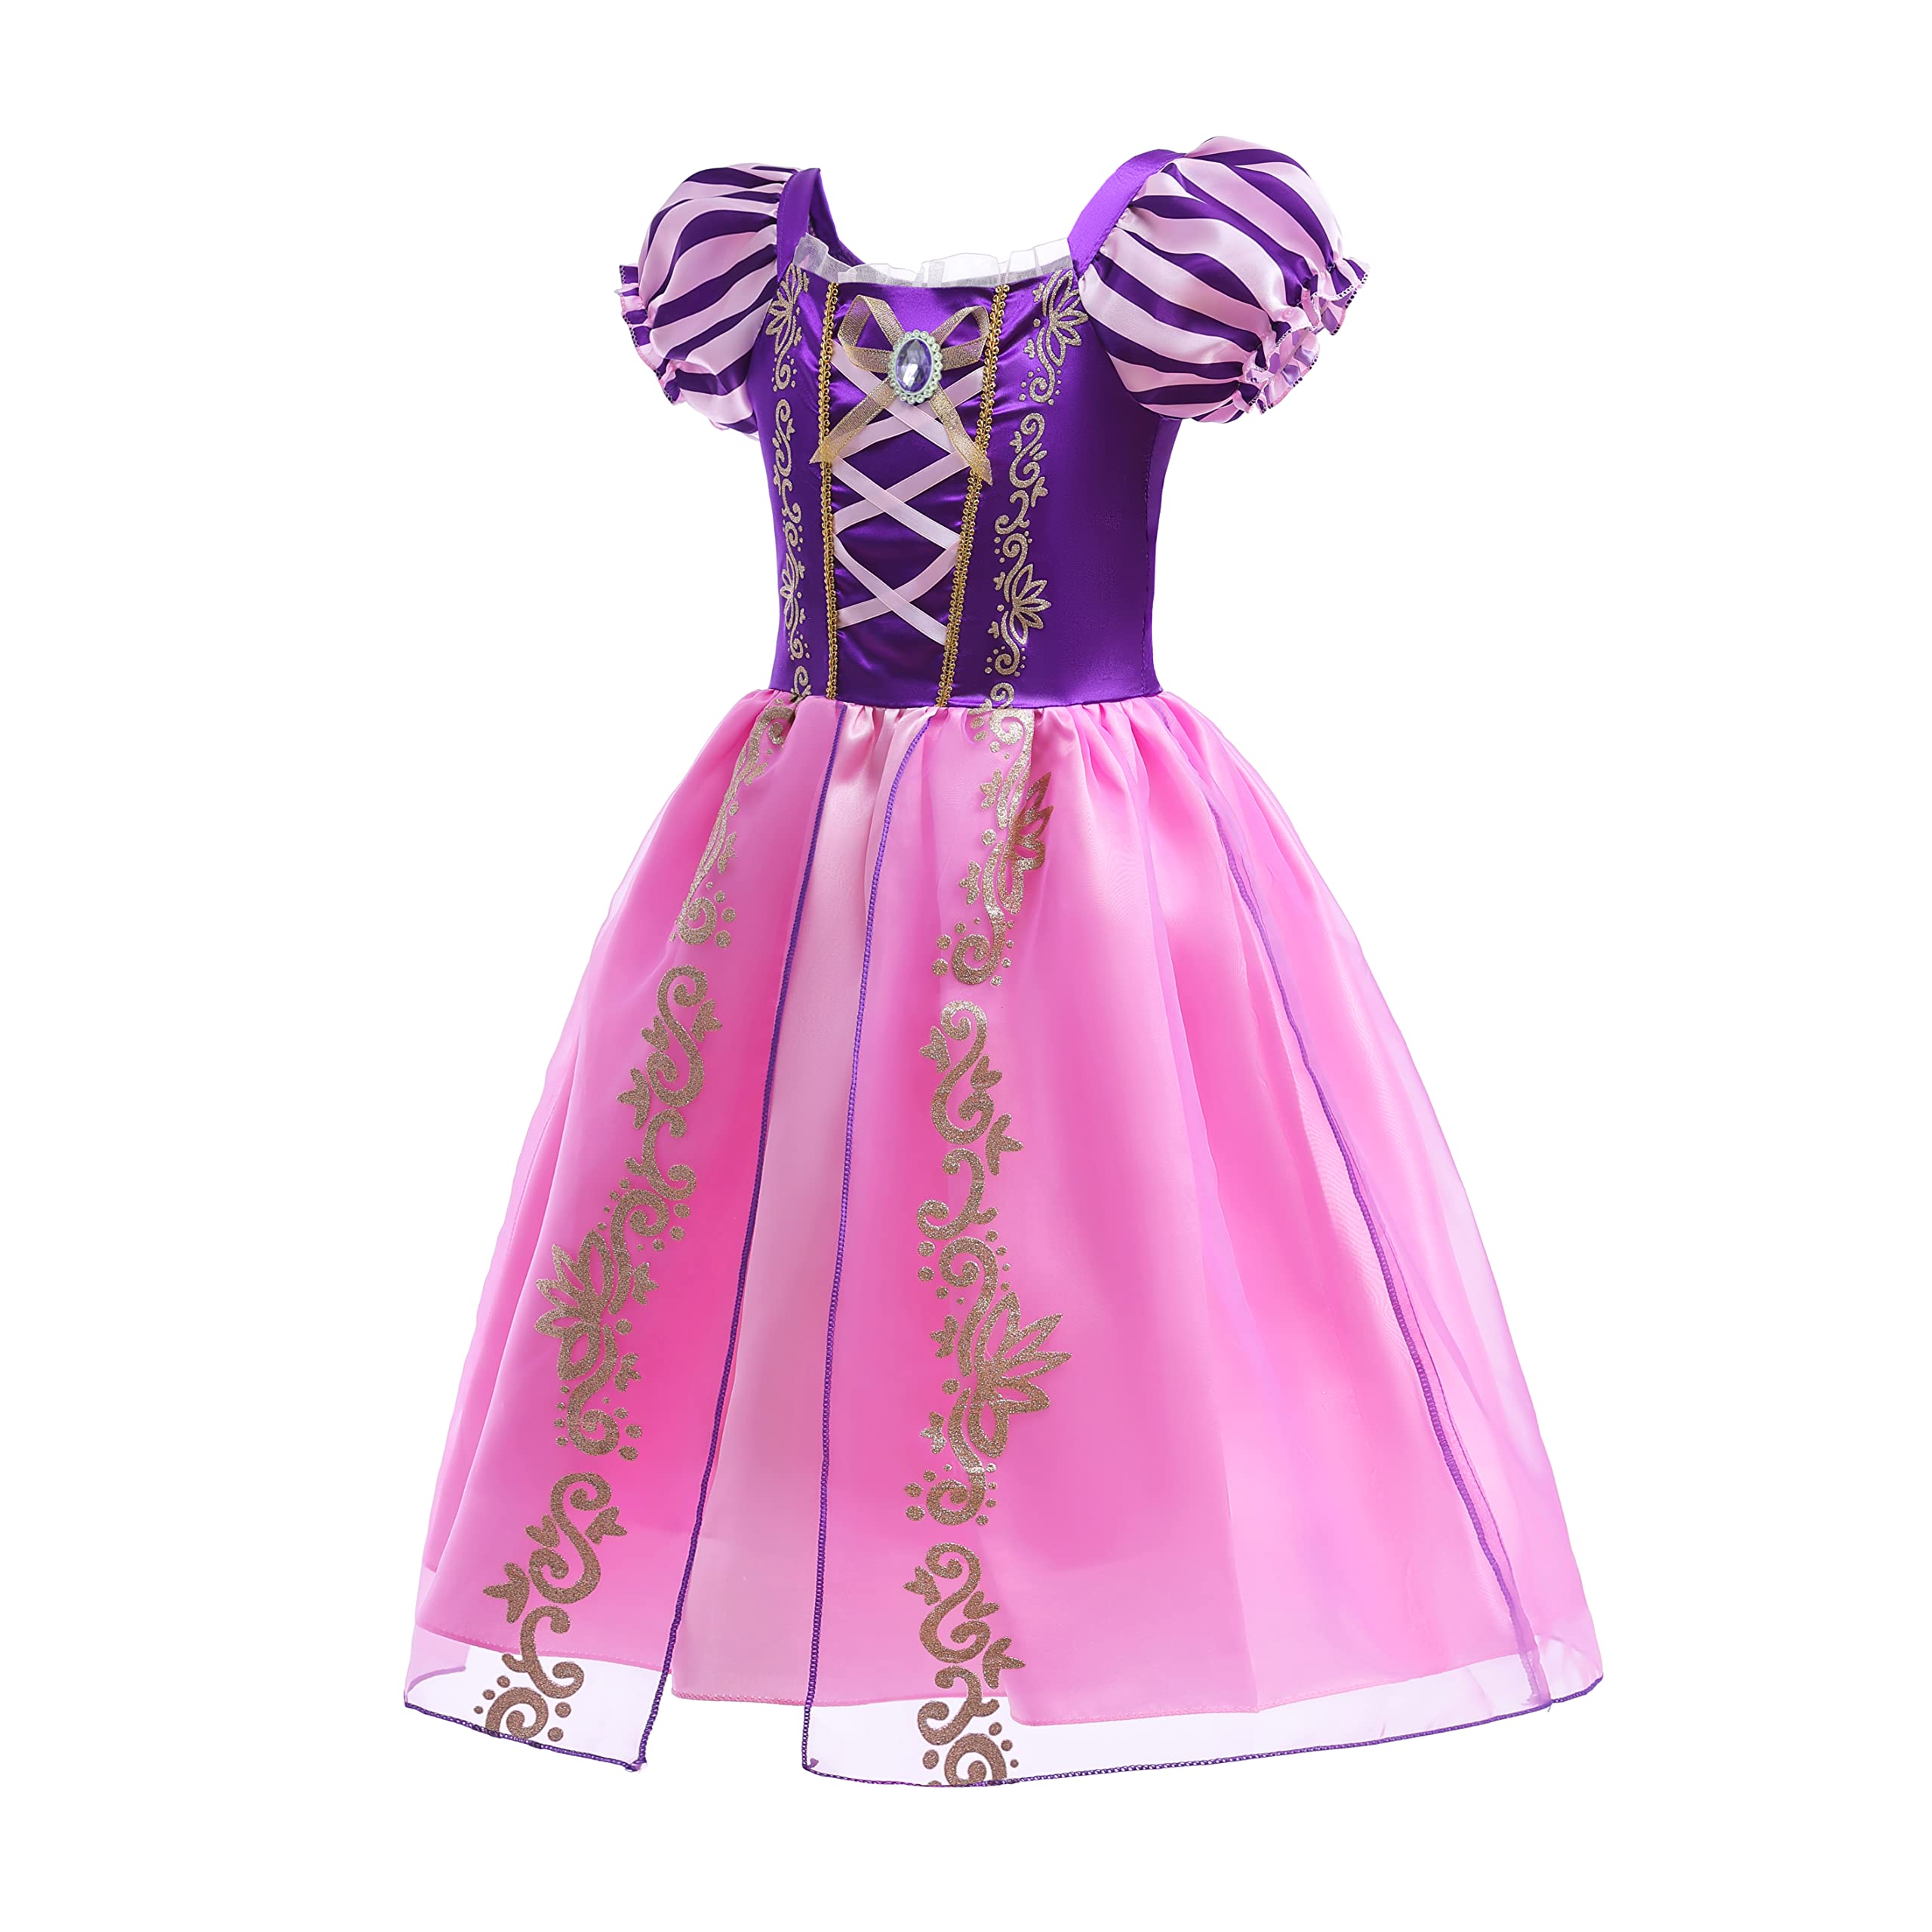 Dressy Daisy Princess Costume Halloween Birthday Fancy Party Dress Up Pageant Gown for Girls